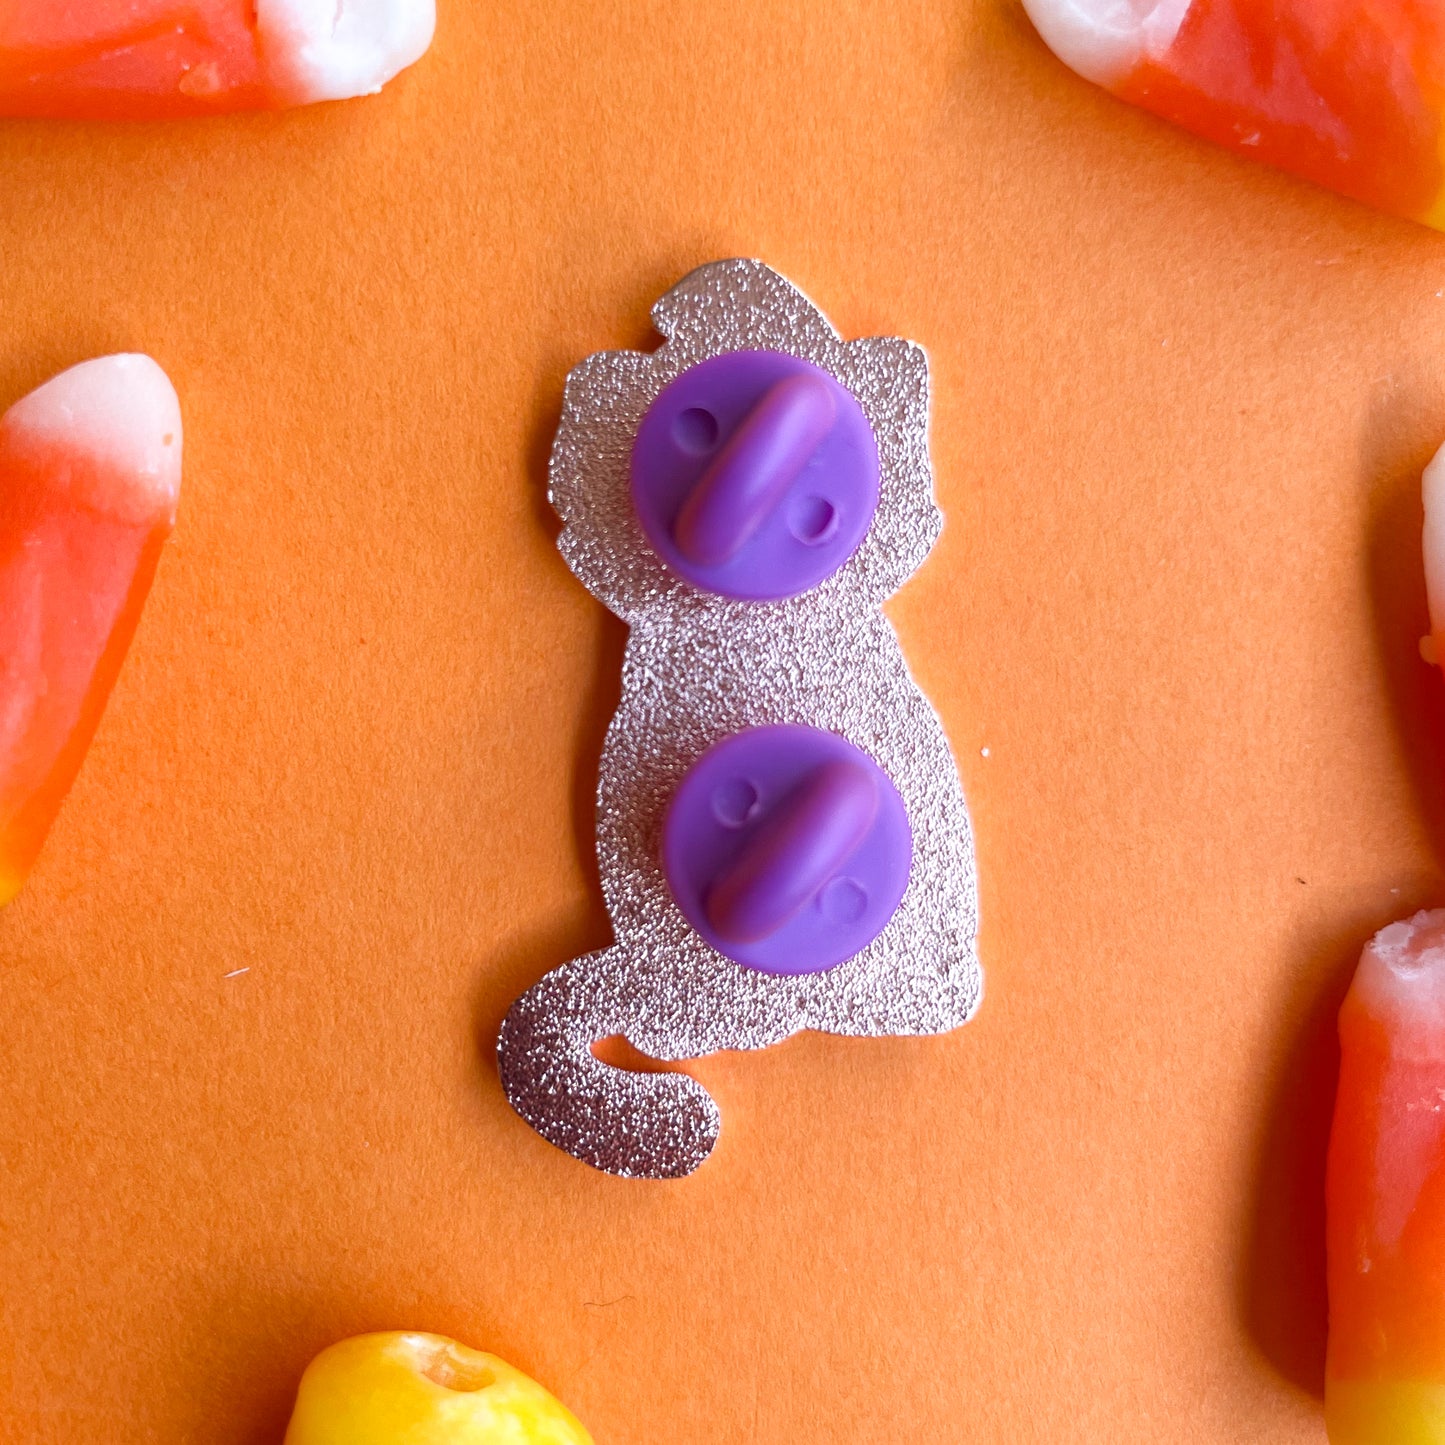 The back of an enamel pin with purple rubber pin backs on an orange background with candy corn.